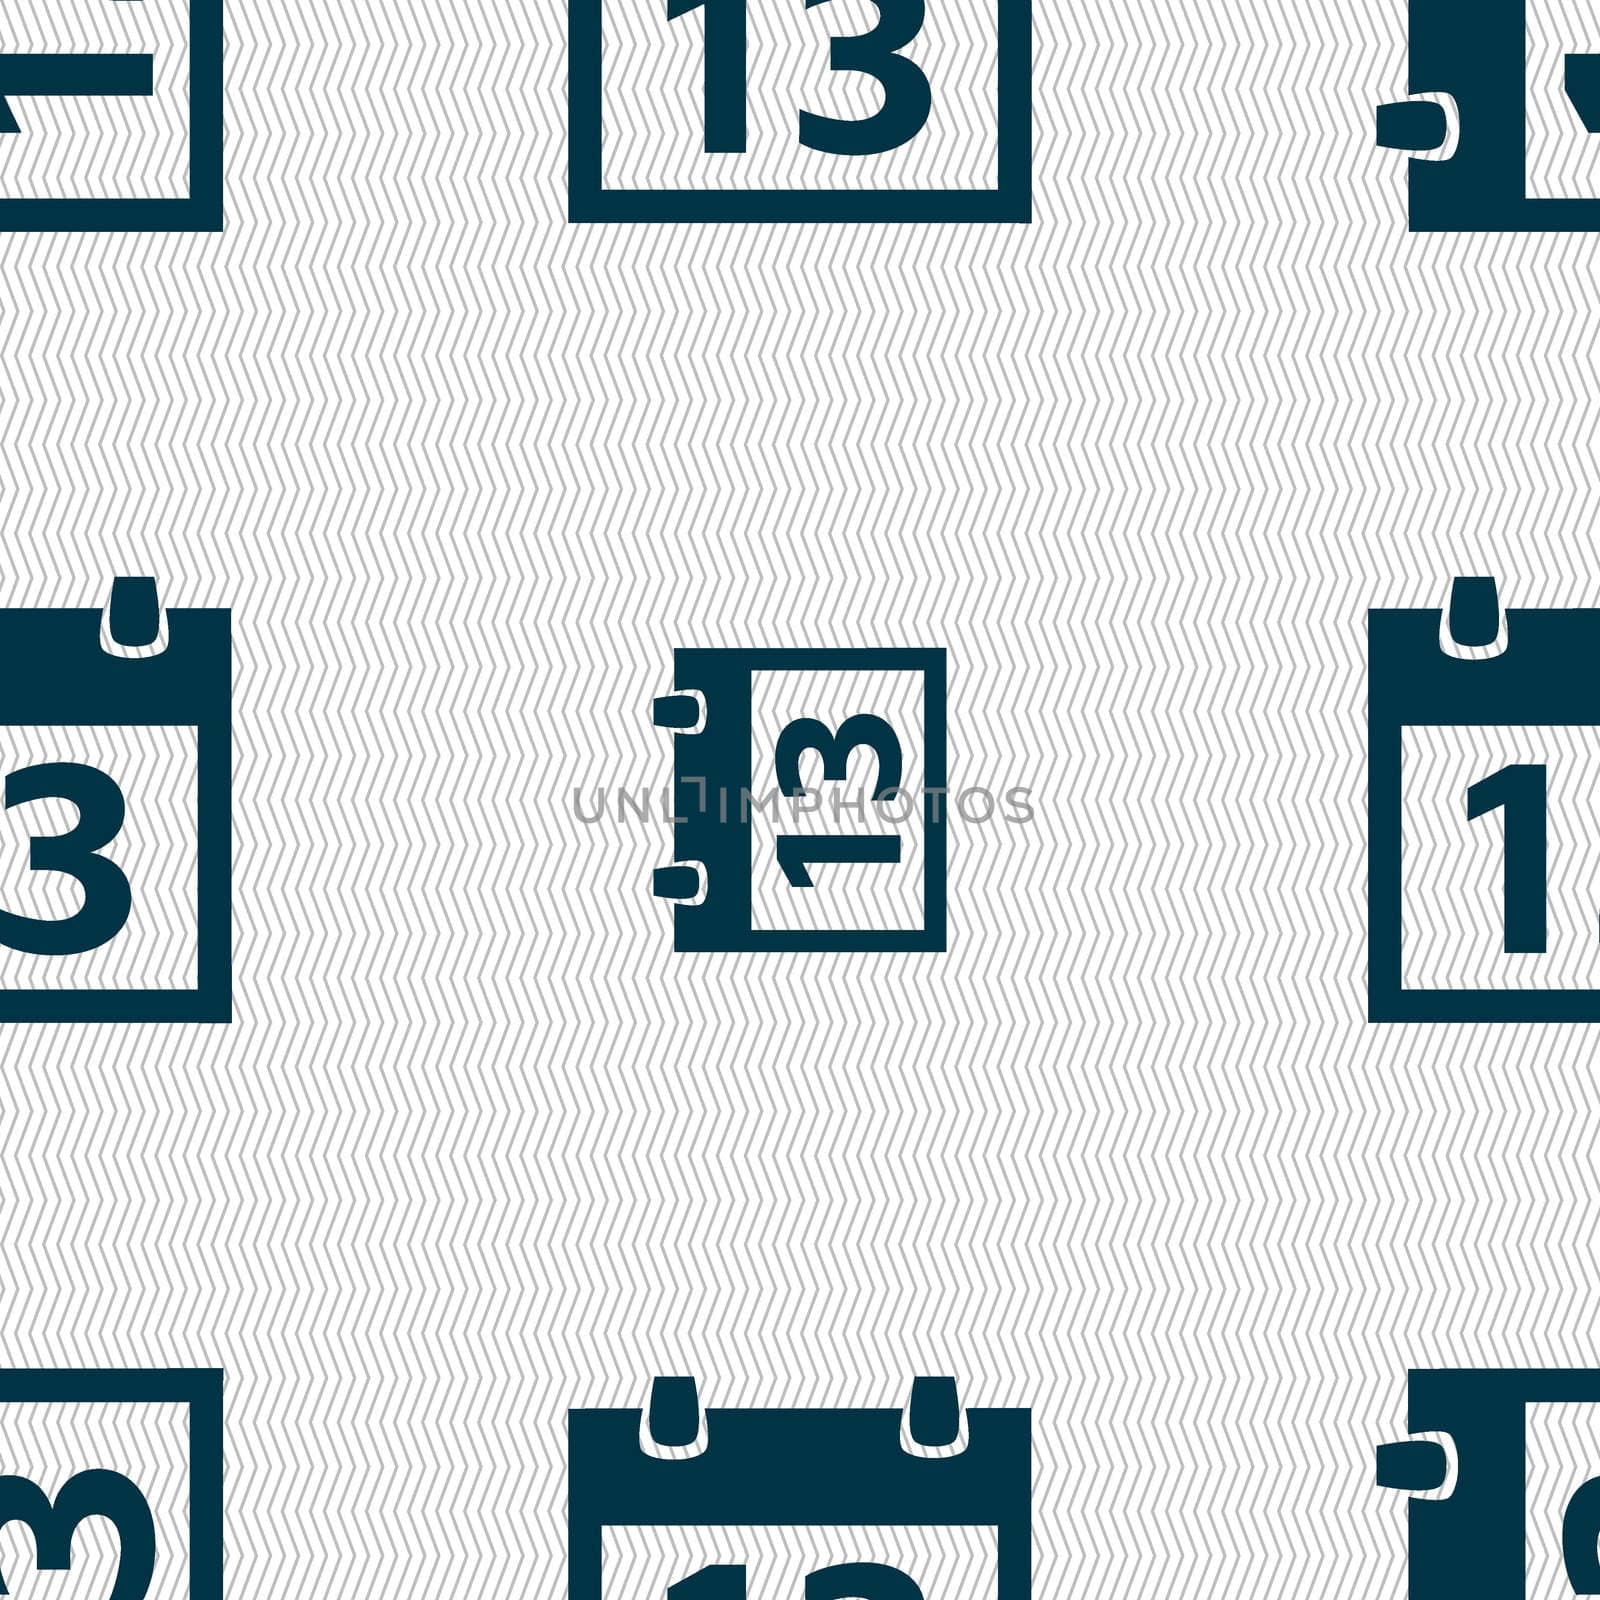 Calendar sign icon. days month symbol. Date button. Seamless abstract background with geometric shapes.  by serhii_lohvyniuk